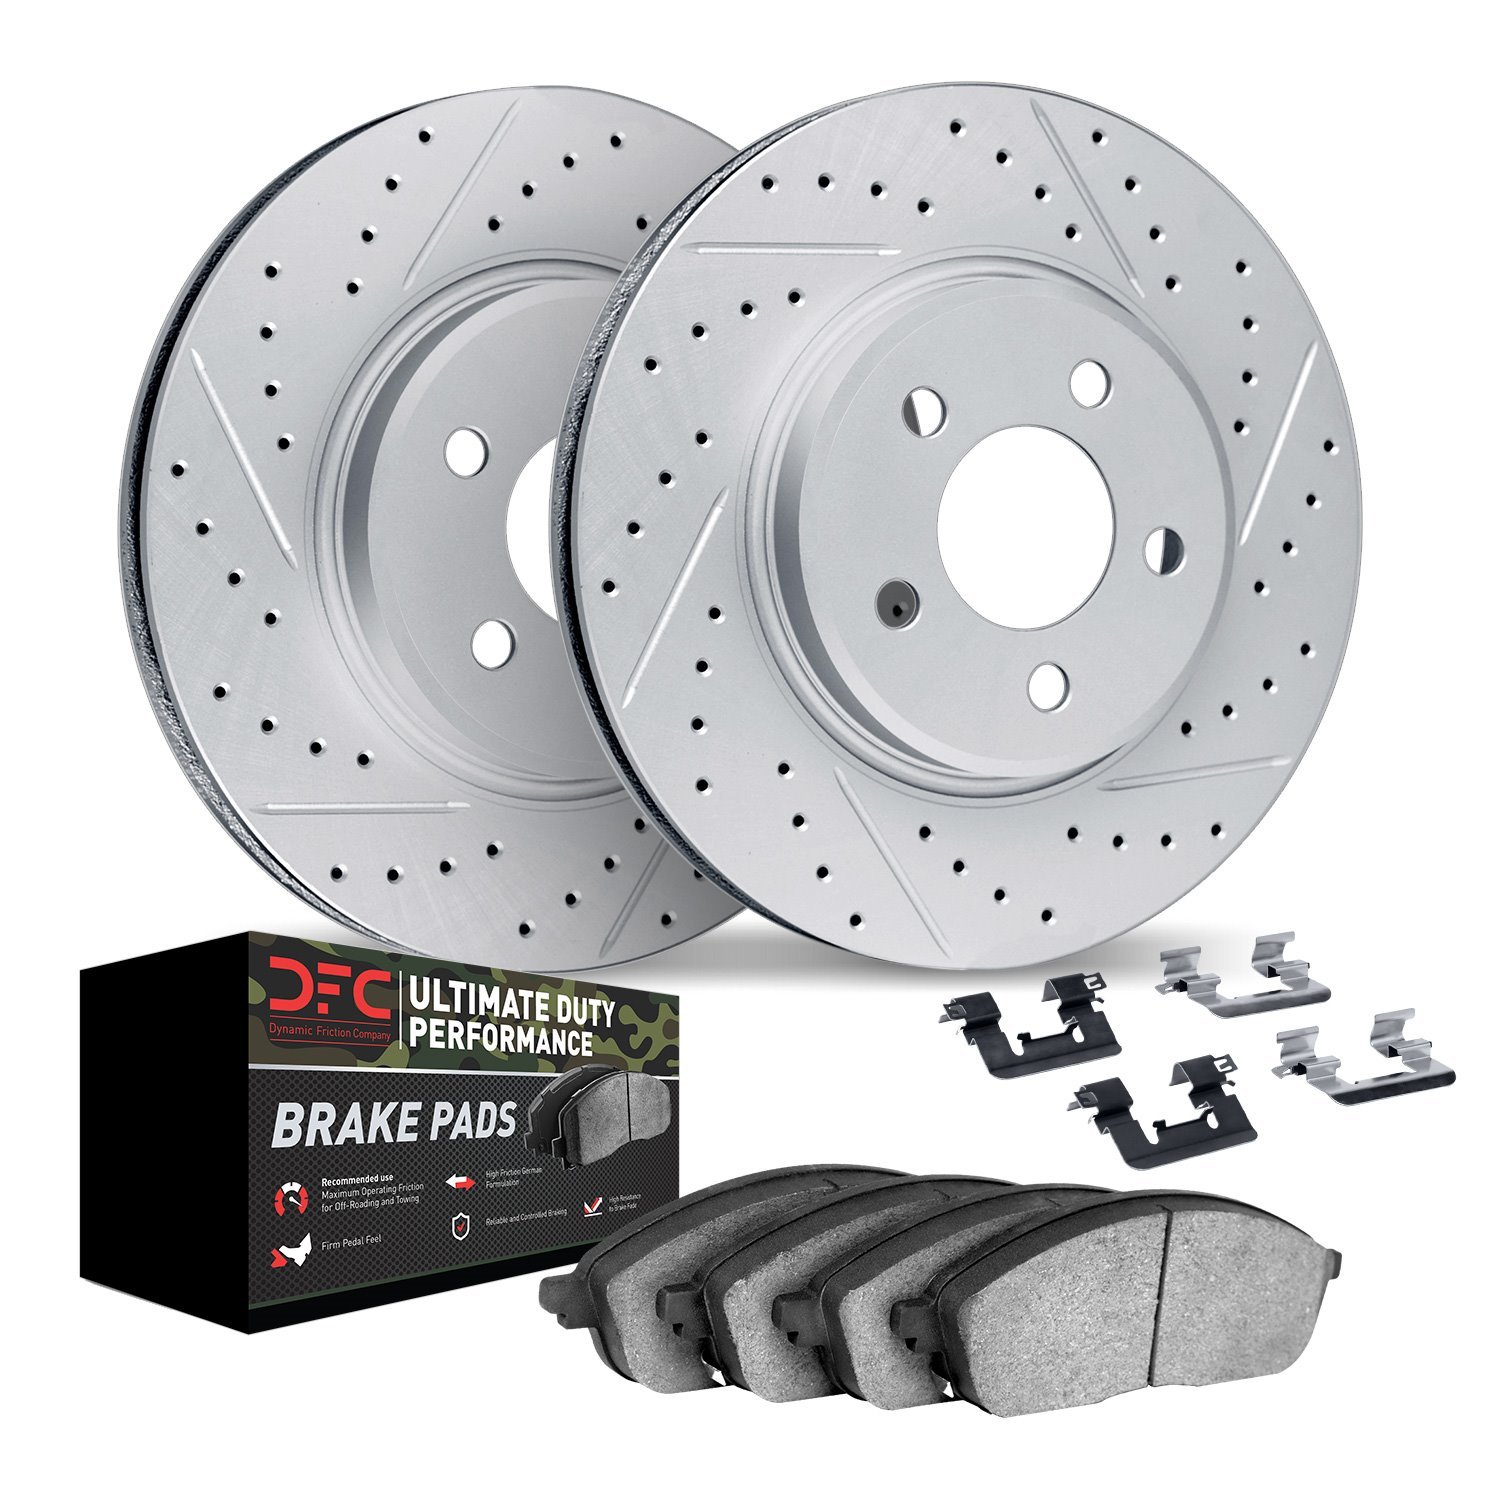 2412-40019 Geoperformance Drilled/Slotted Brake Rotors with Ultimate-Duty Brake Pads Kit & Hardware, Fits Select Multiple Makes/